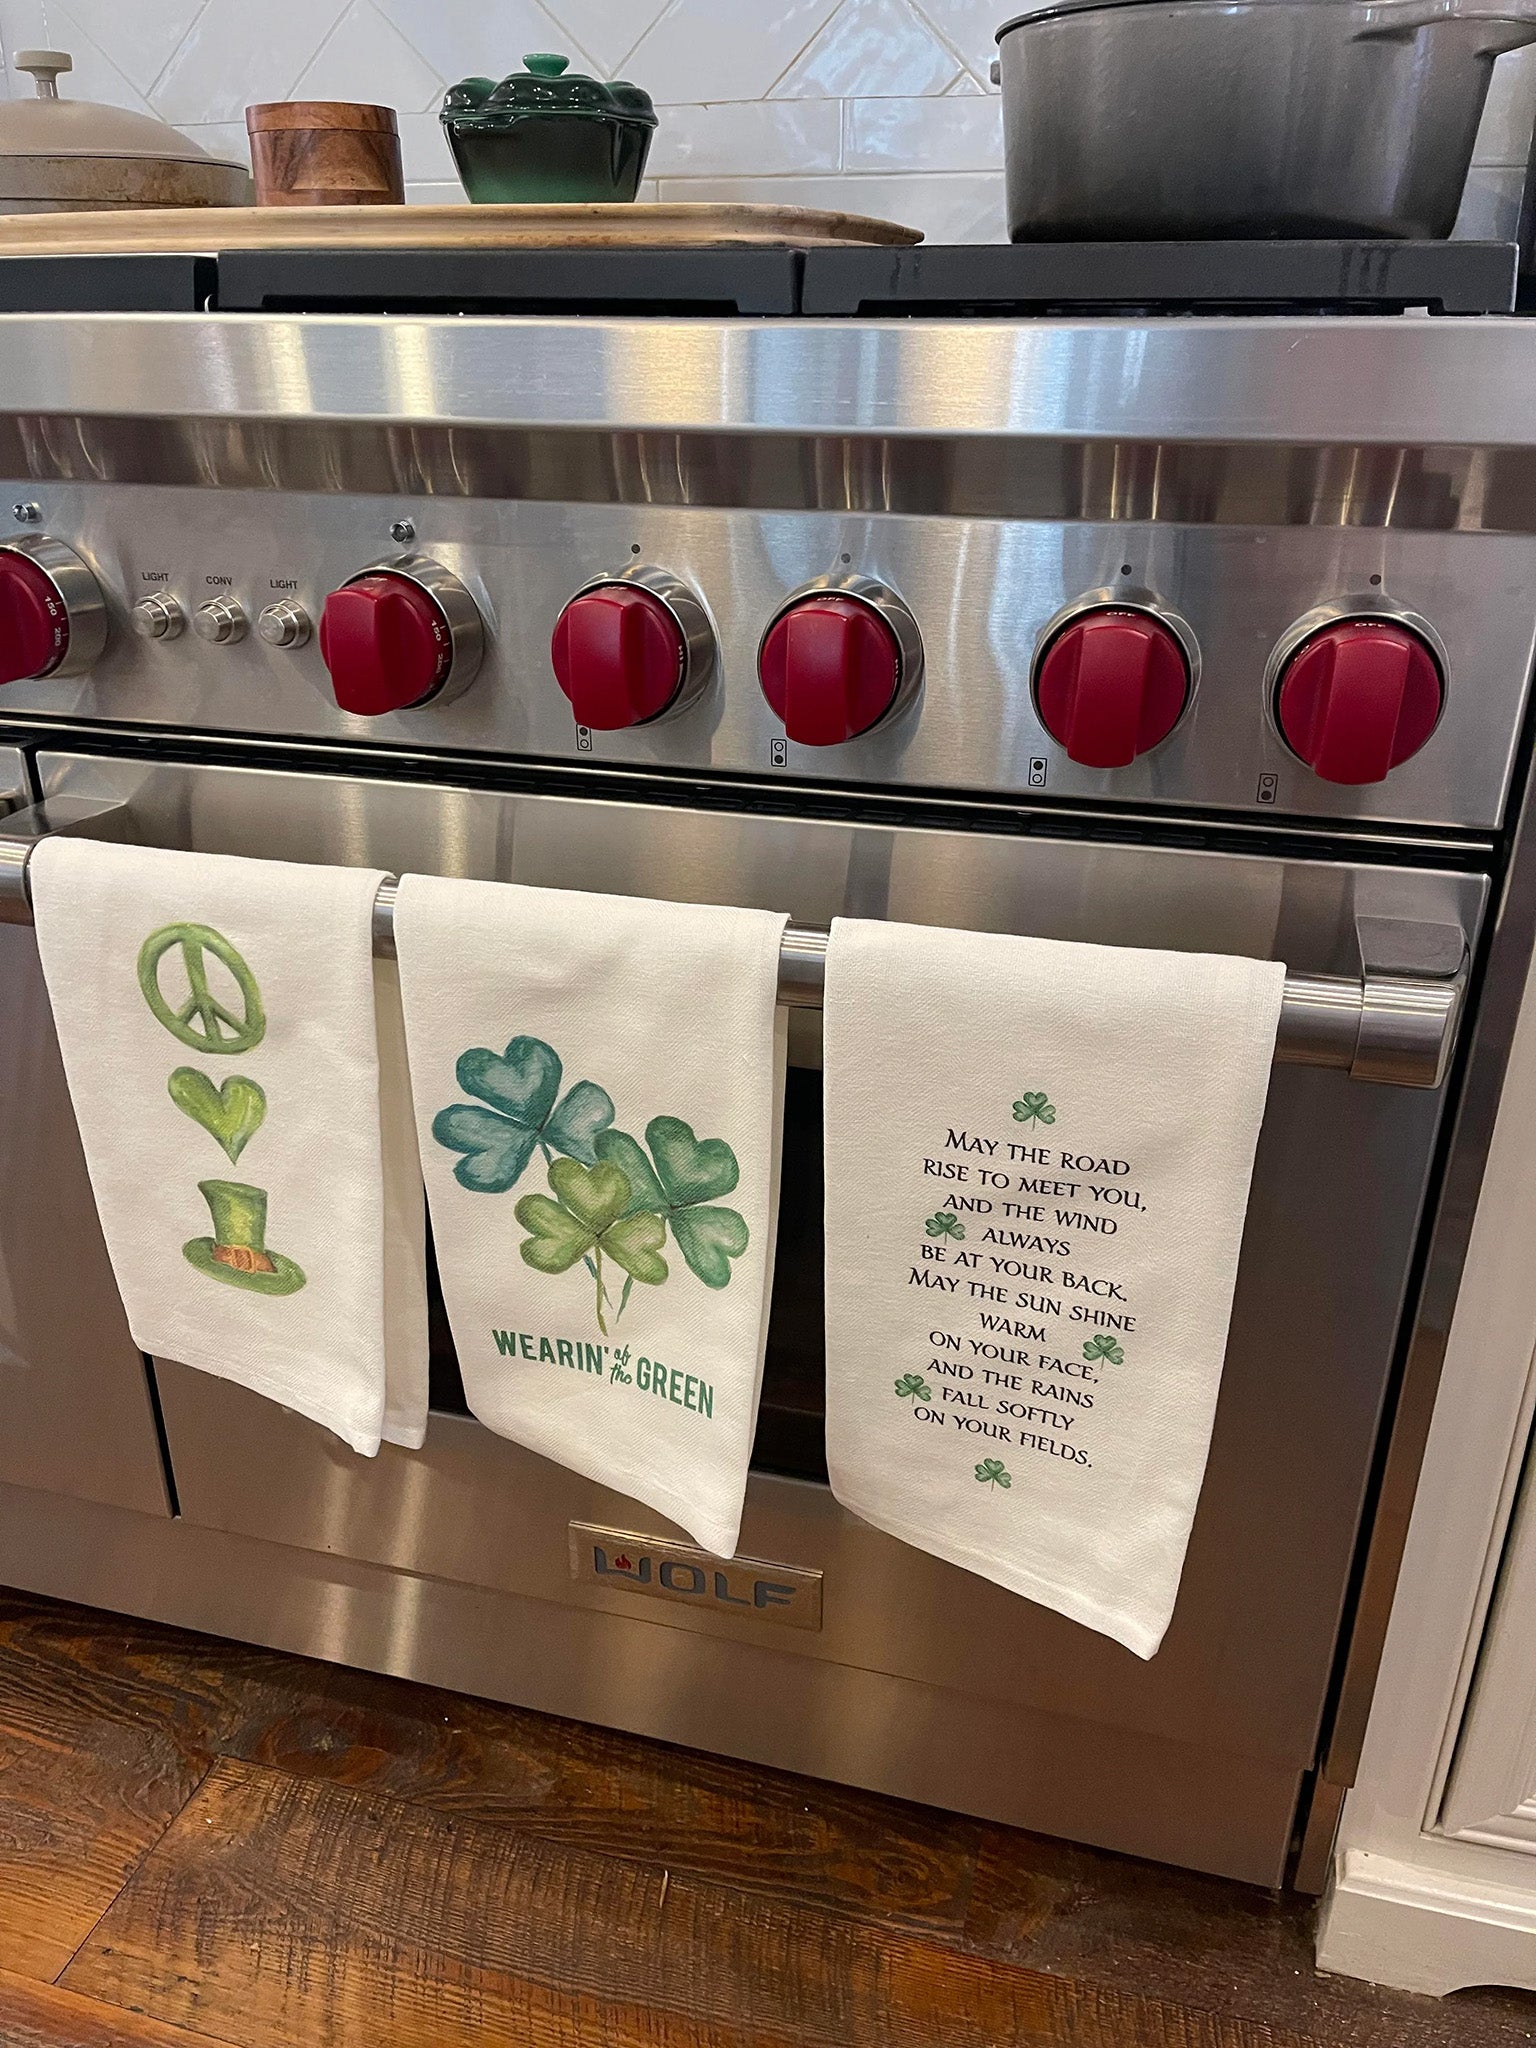 Three St. Patrick's Day kitchen Towels hanging in front of stove.